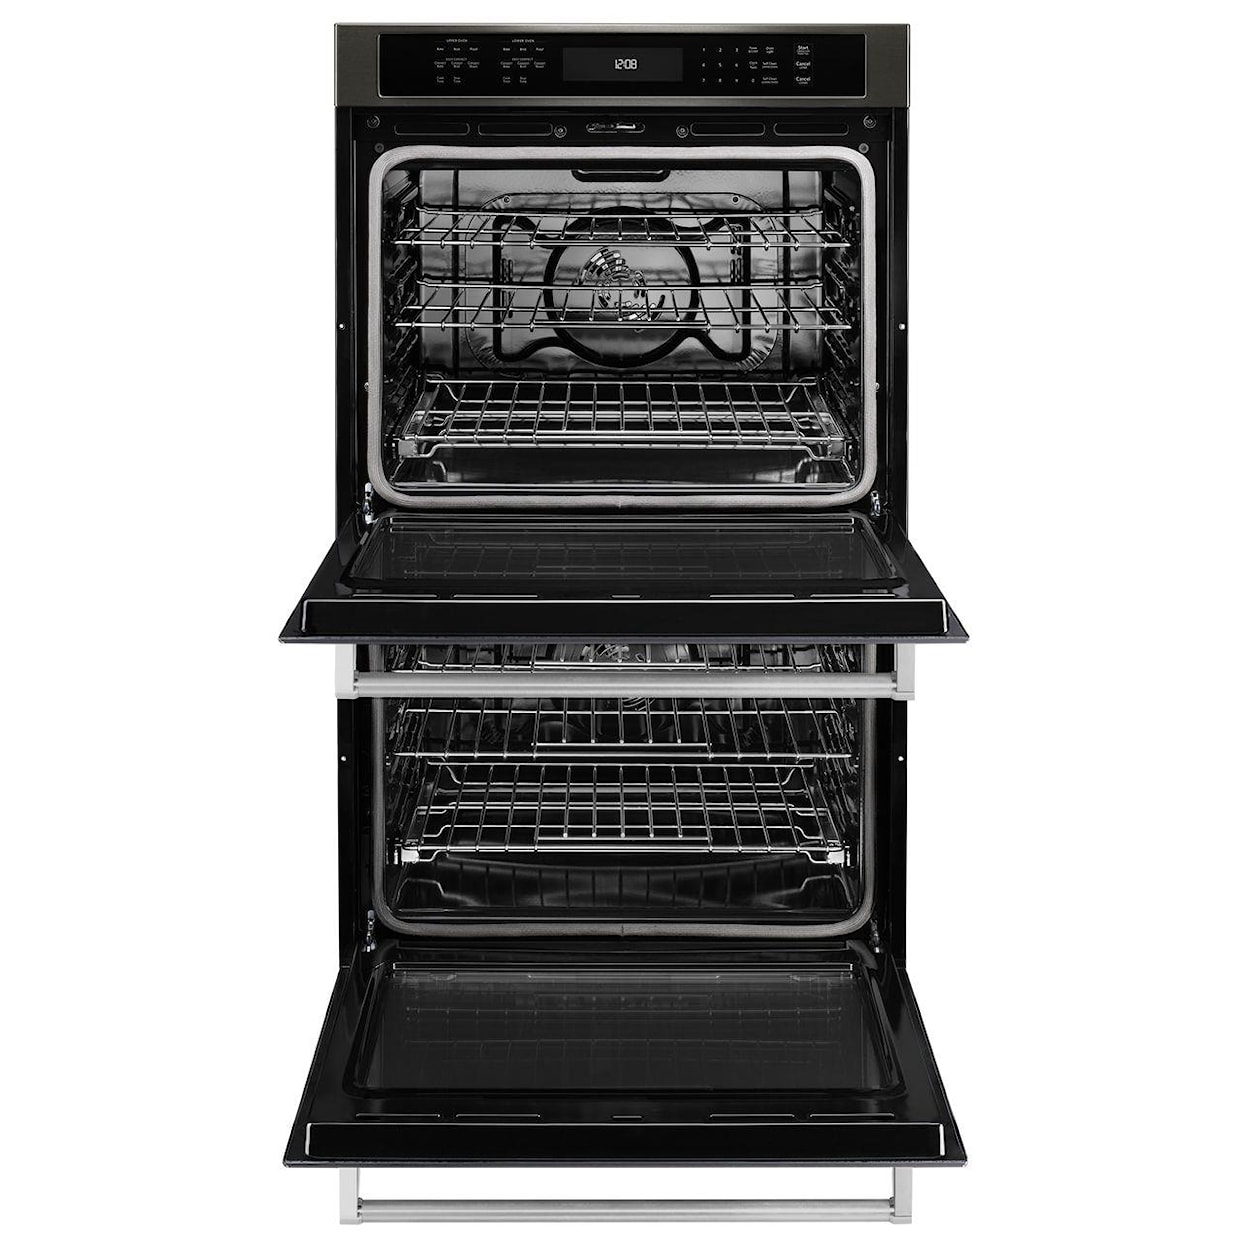 KitchenAid Built-In Electric Double Ovens 30" 5.0 Cu. Ft. Convection Double Wall Oven